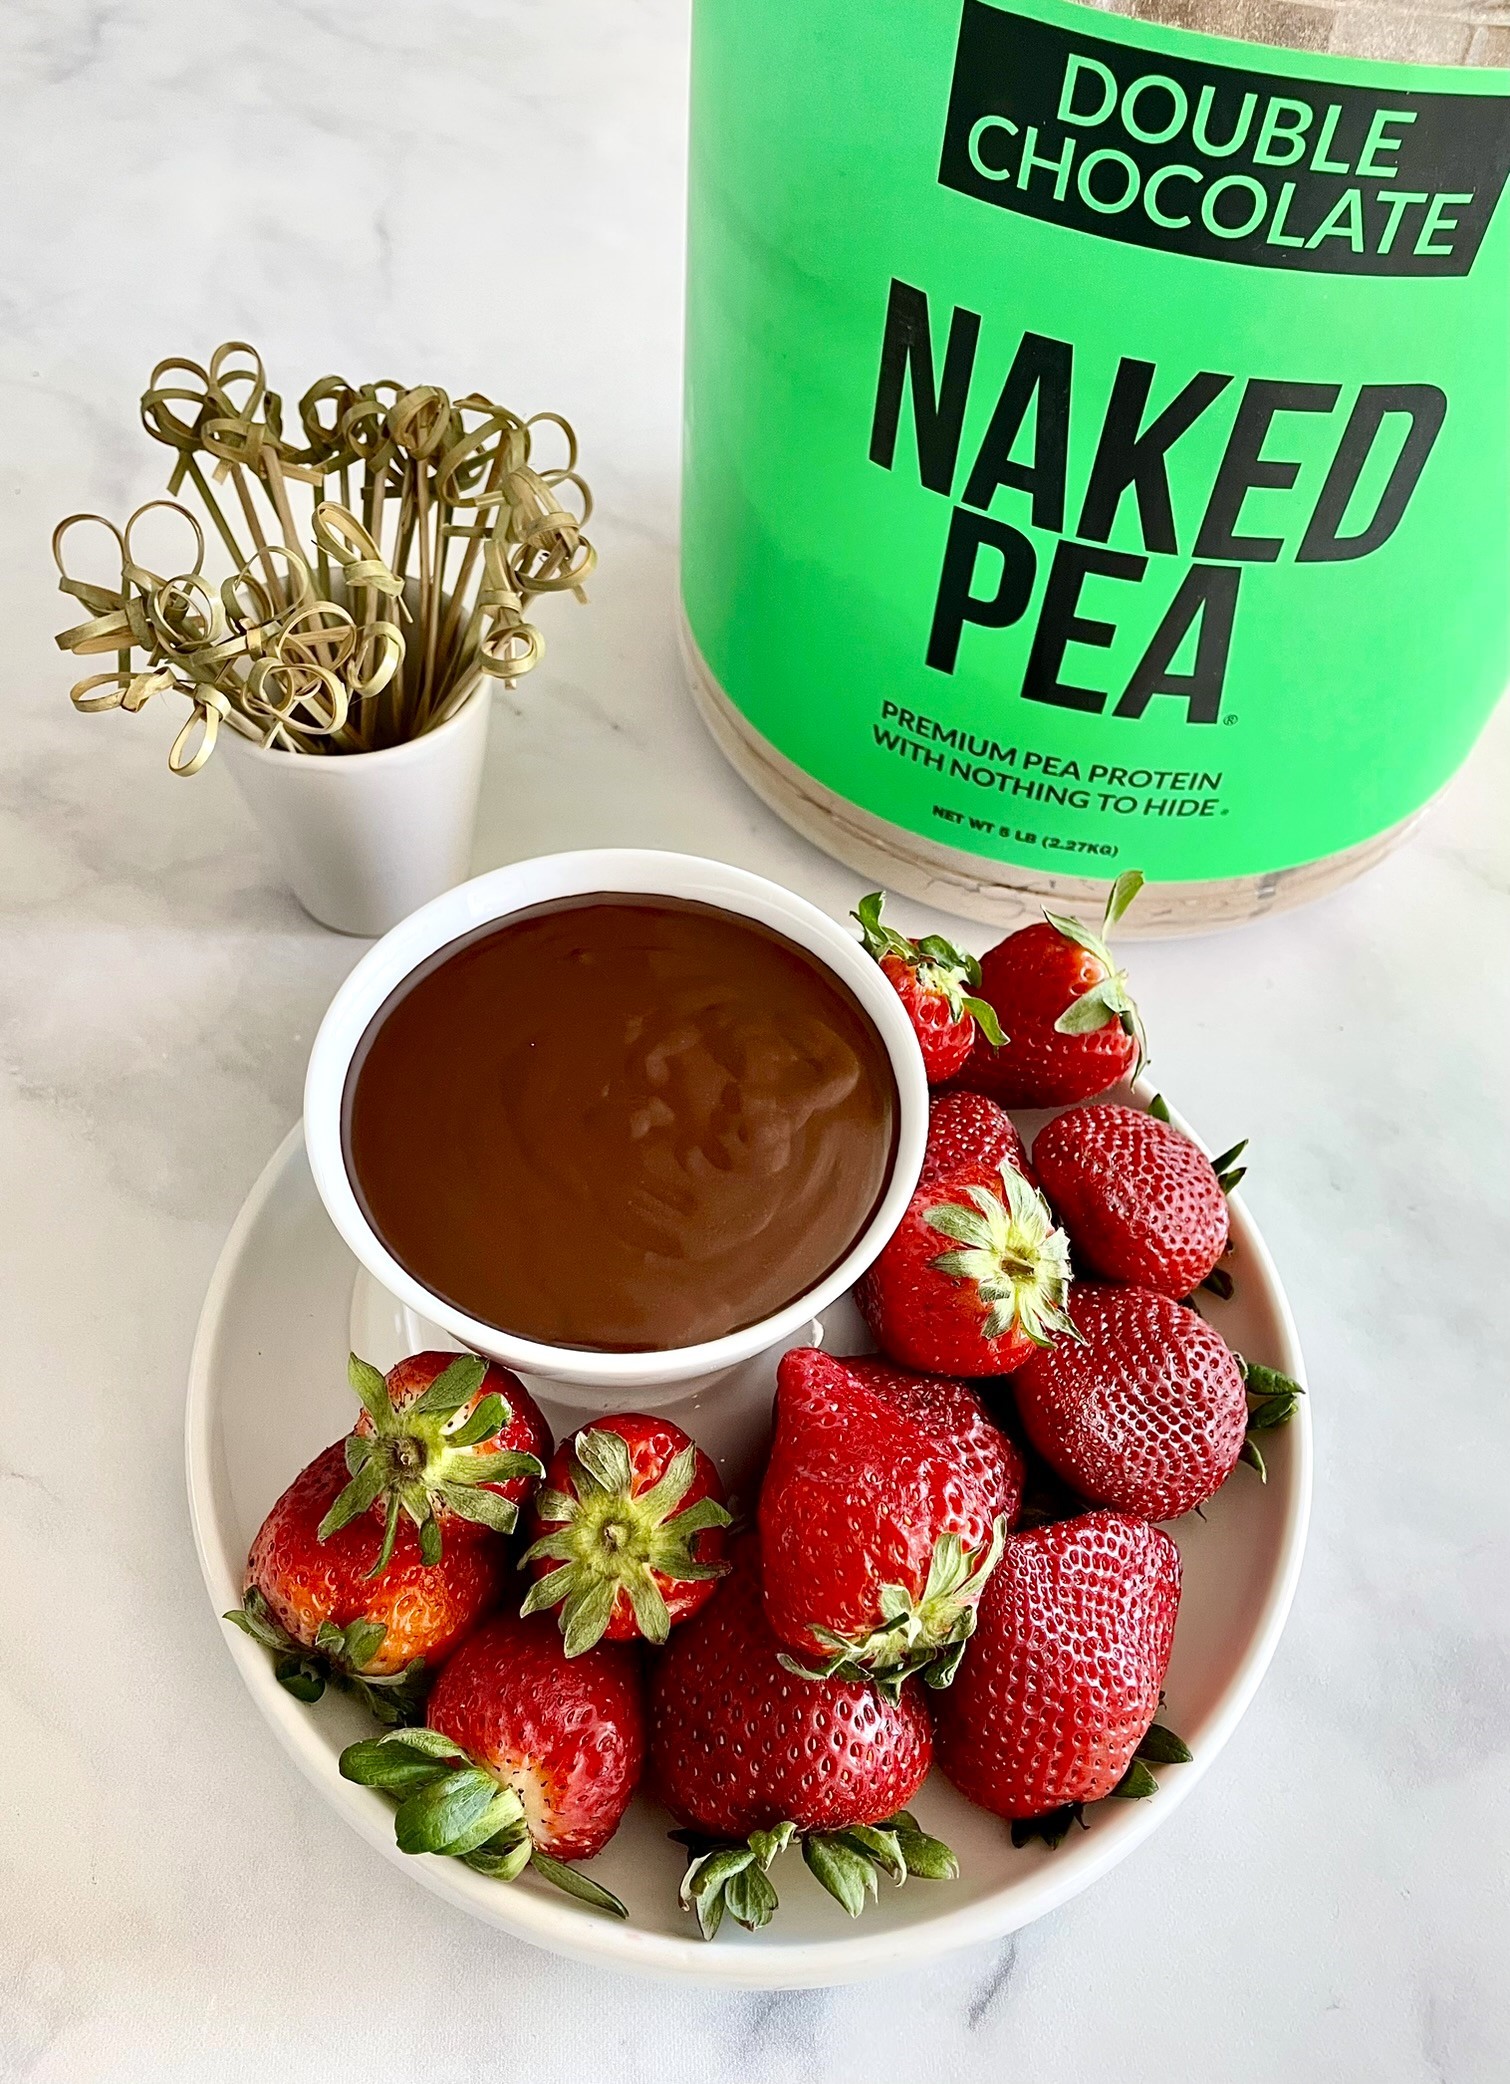 PLate of strawberries with chocolate sauce with Double Chocolate Naked Pea protein powder jar in background